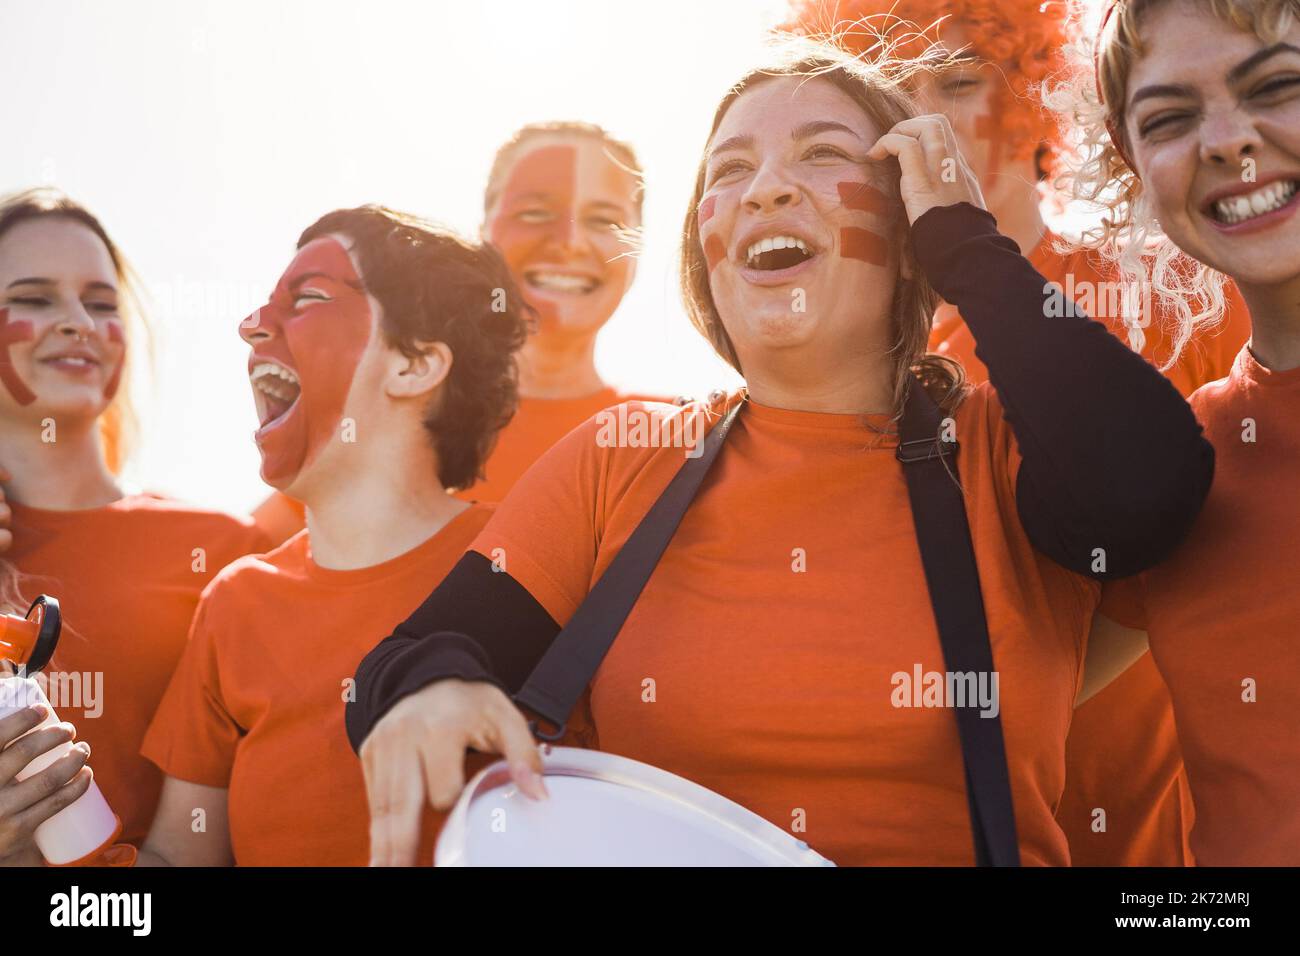 Orange sport football fans screaming while supporting their team out of the stadium - Focus on girl holding drum Stock Photo